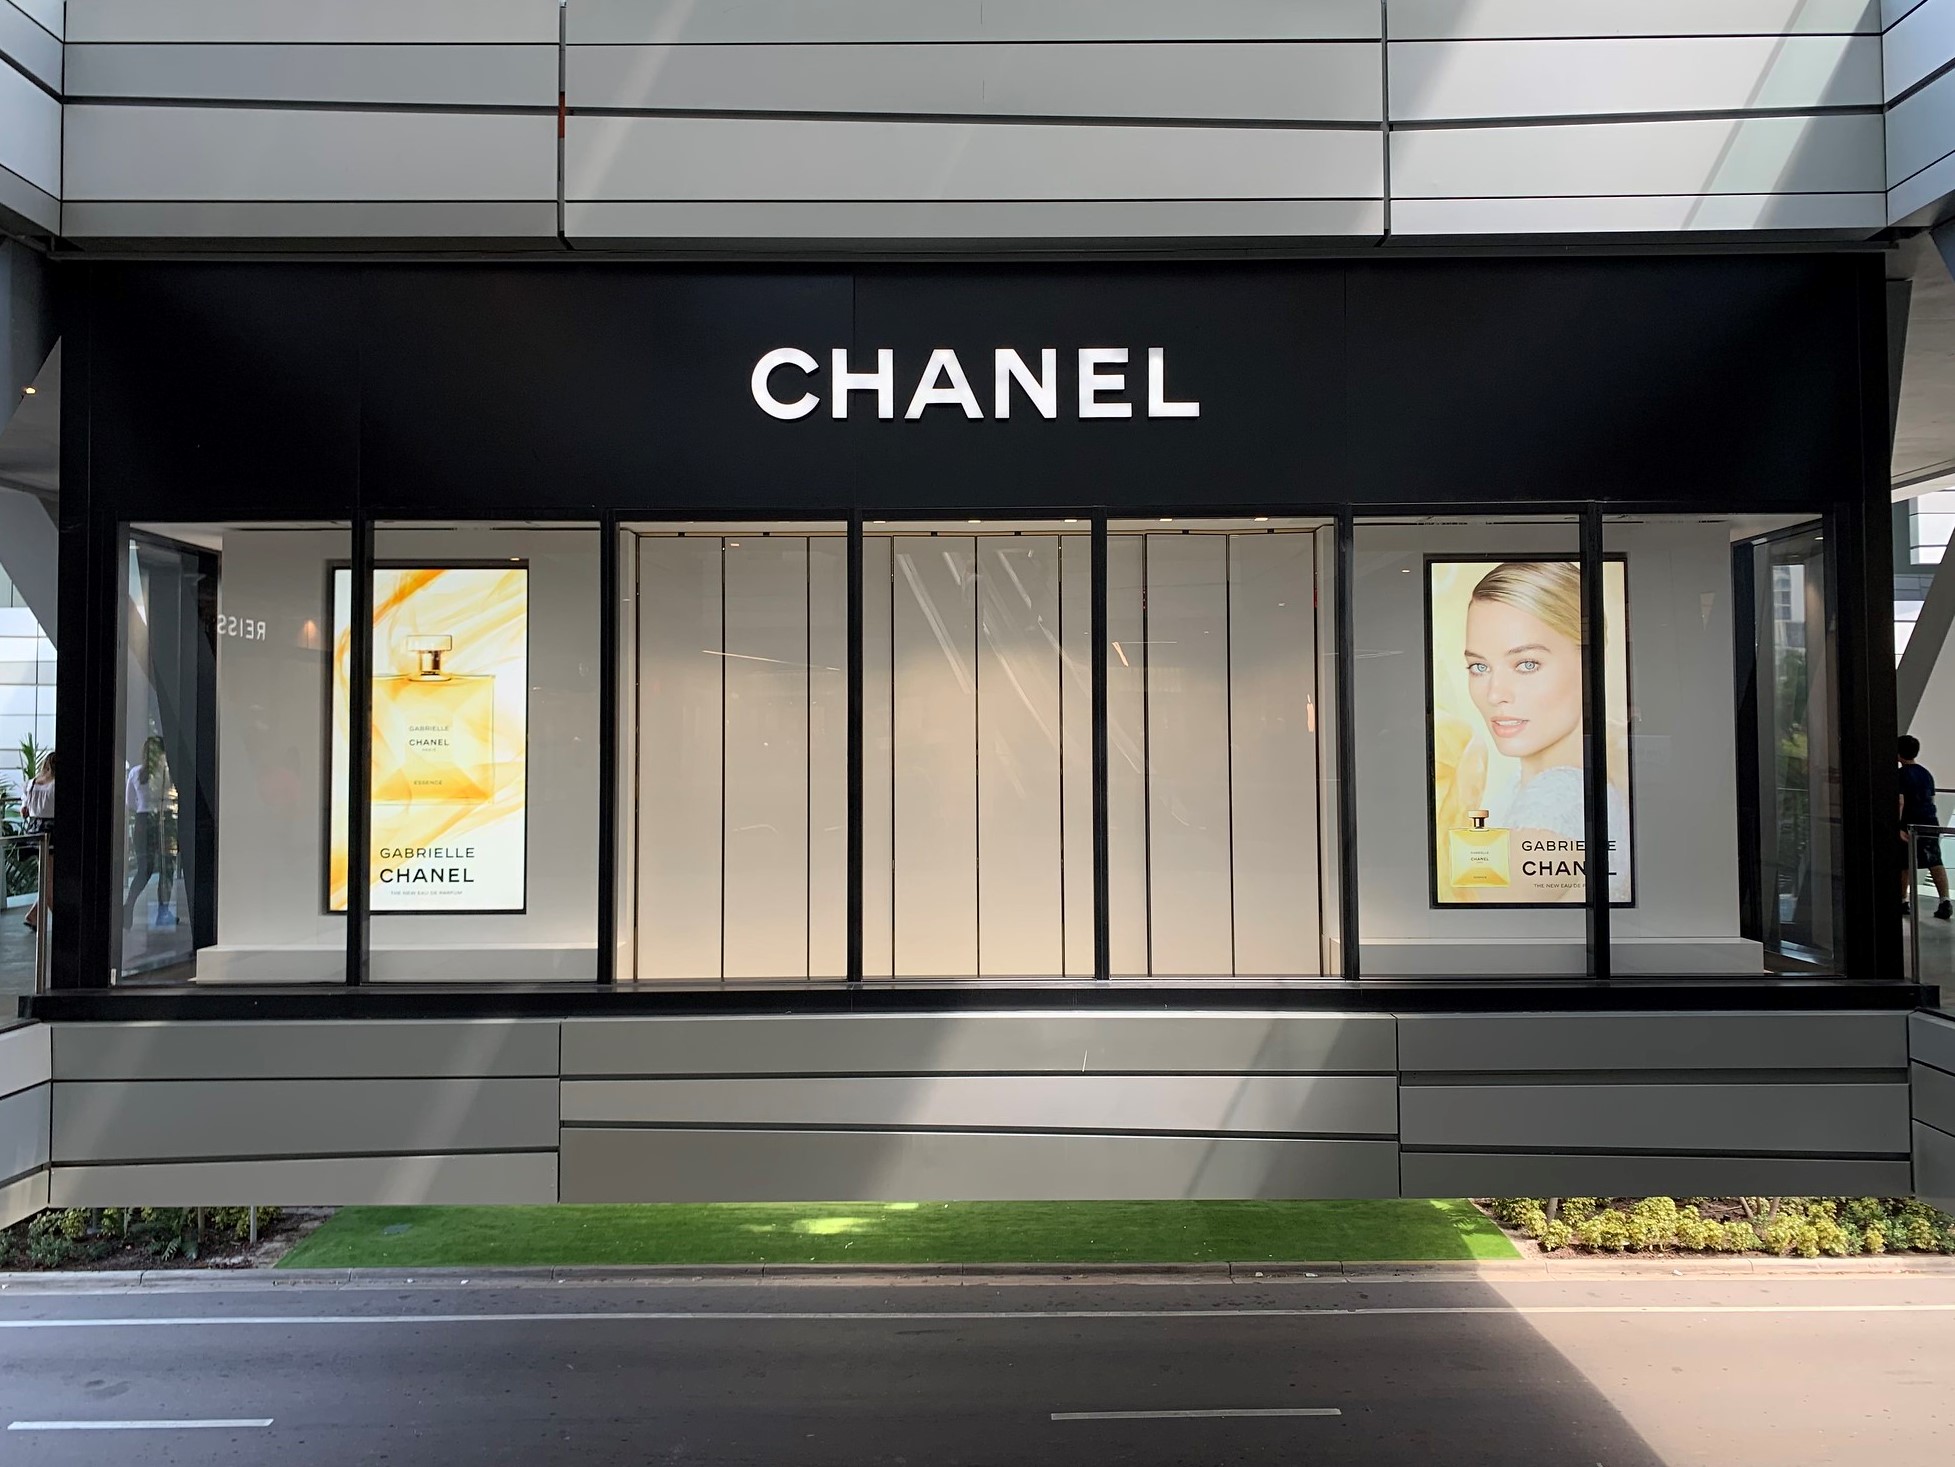 The Architecture of Chanel, Signed Books, Store